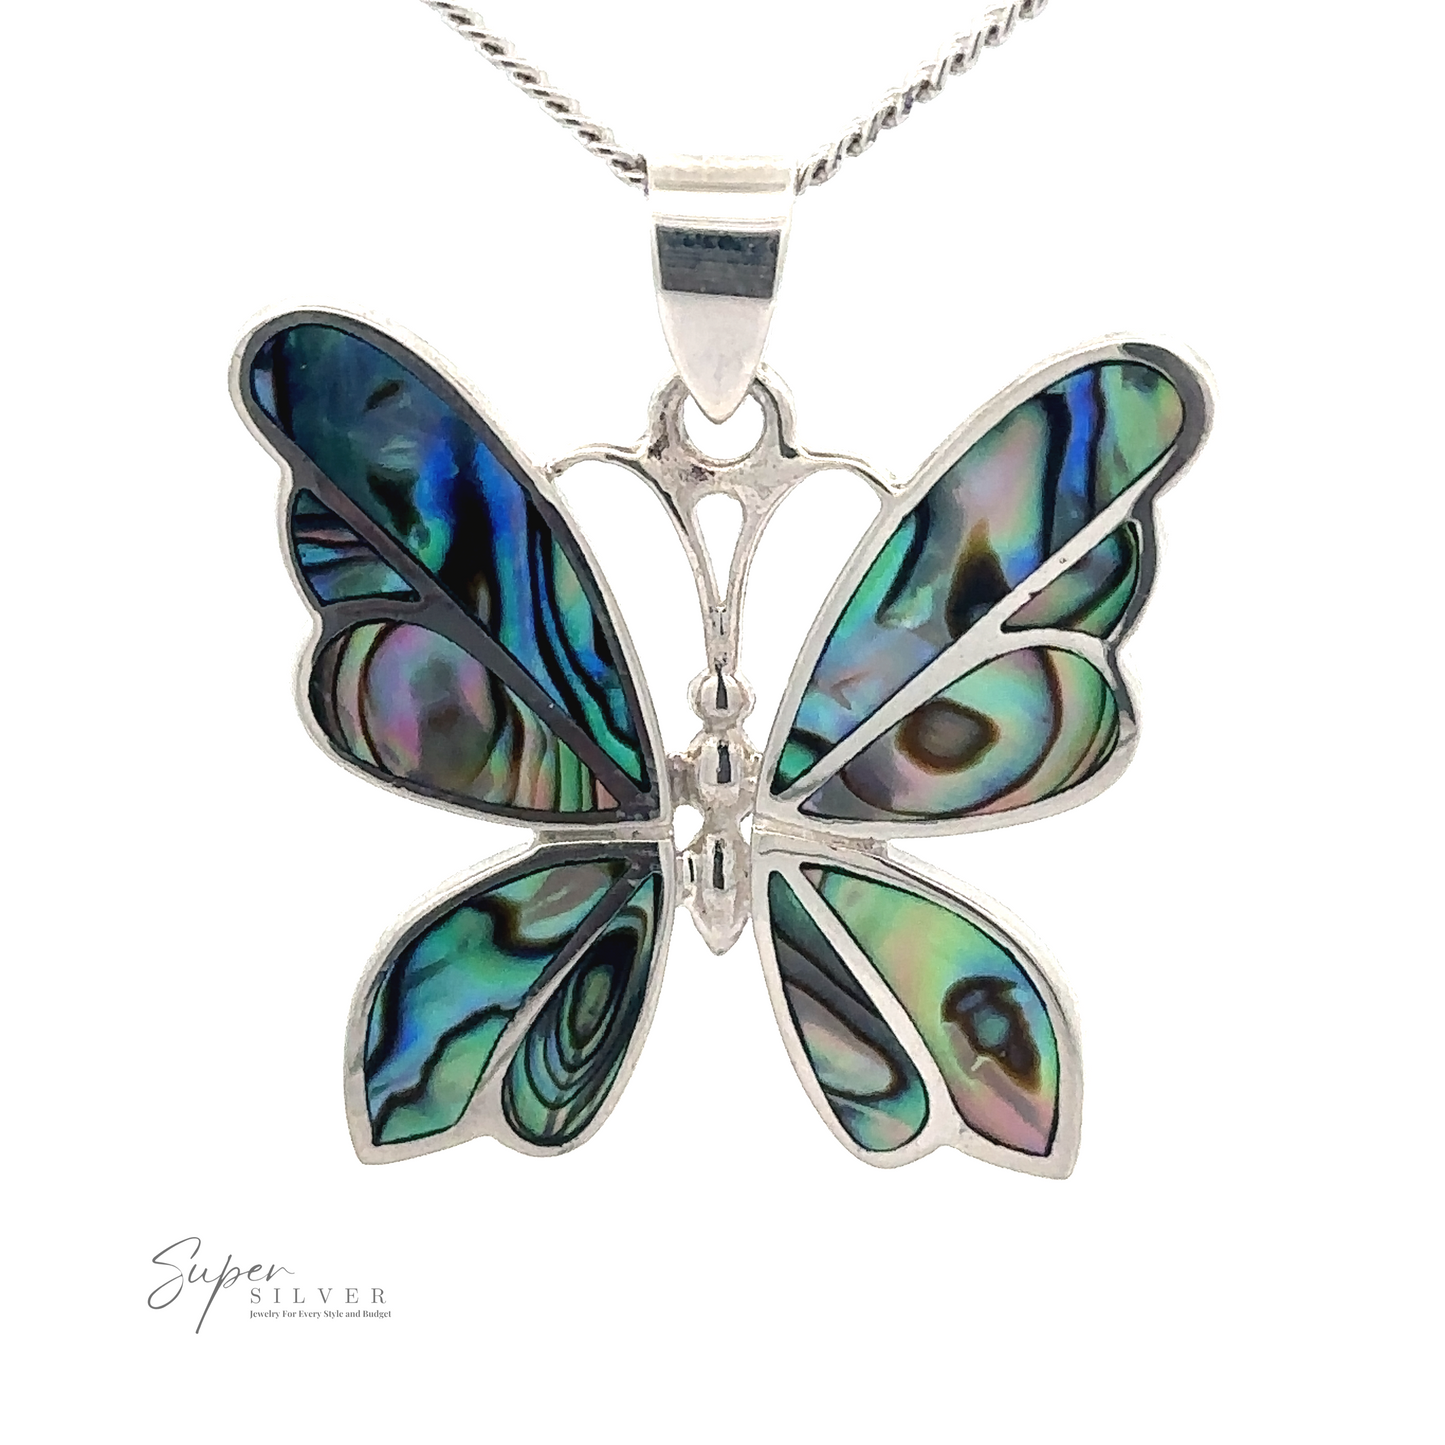 
                  
                    A Medium Inlay Butterfly Pendant adorned with colorful, iridescent abalone shell wings on a silver chain. The piece is intricately designed with vibrant blue, green, and purple hues. The "Super Silver" logo is visible, making it a stunning addition to any gemstone jewelry collection.
                  
                